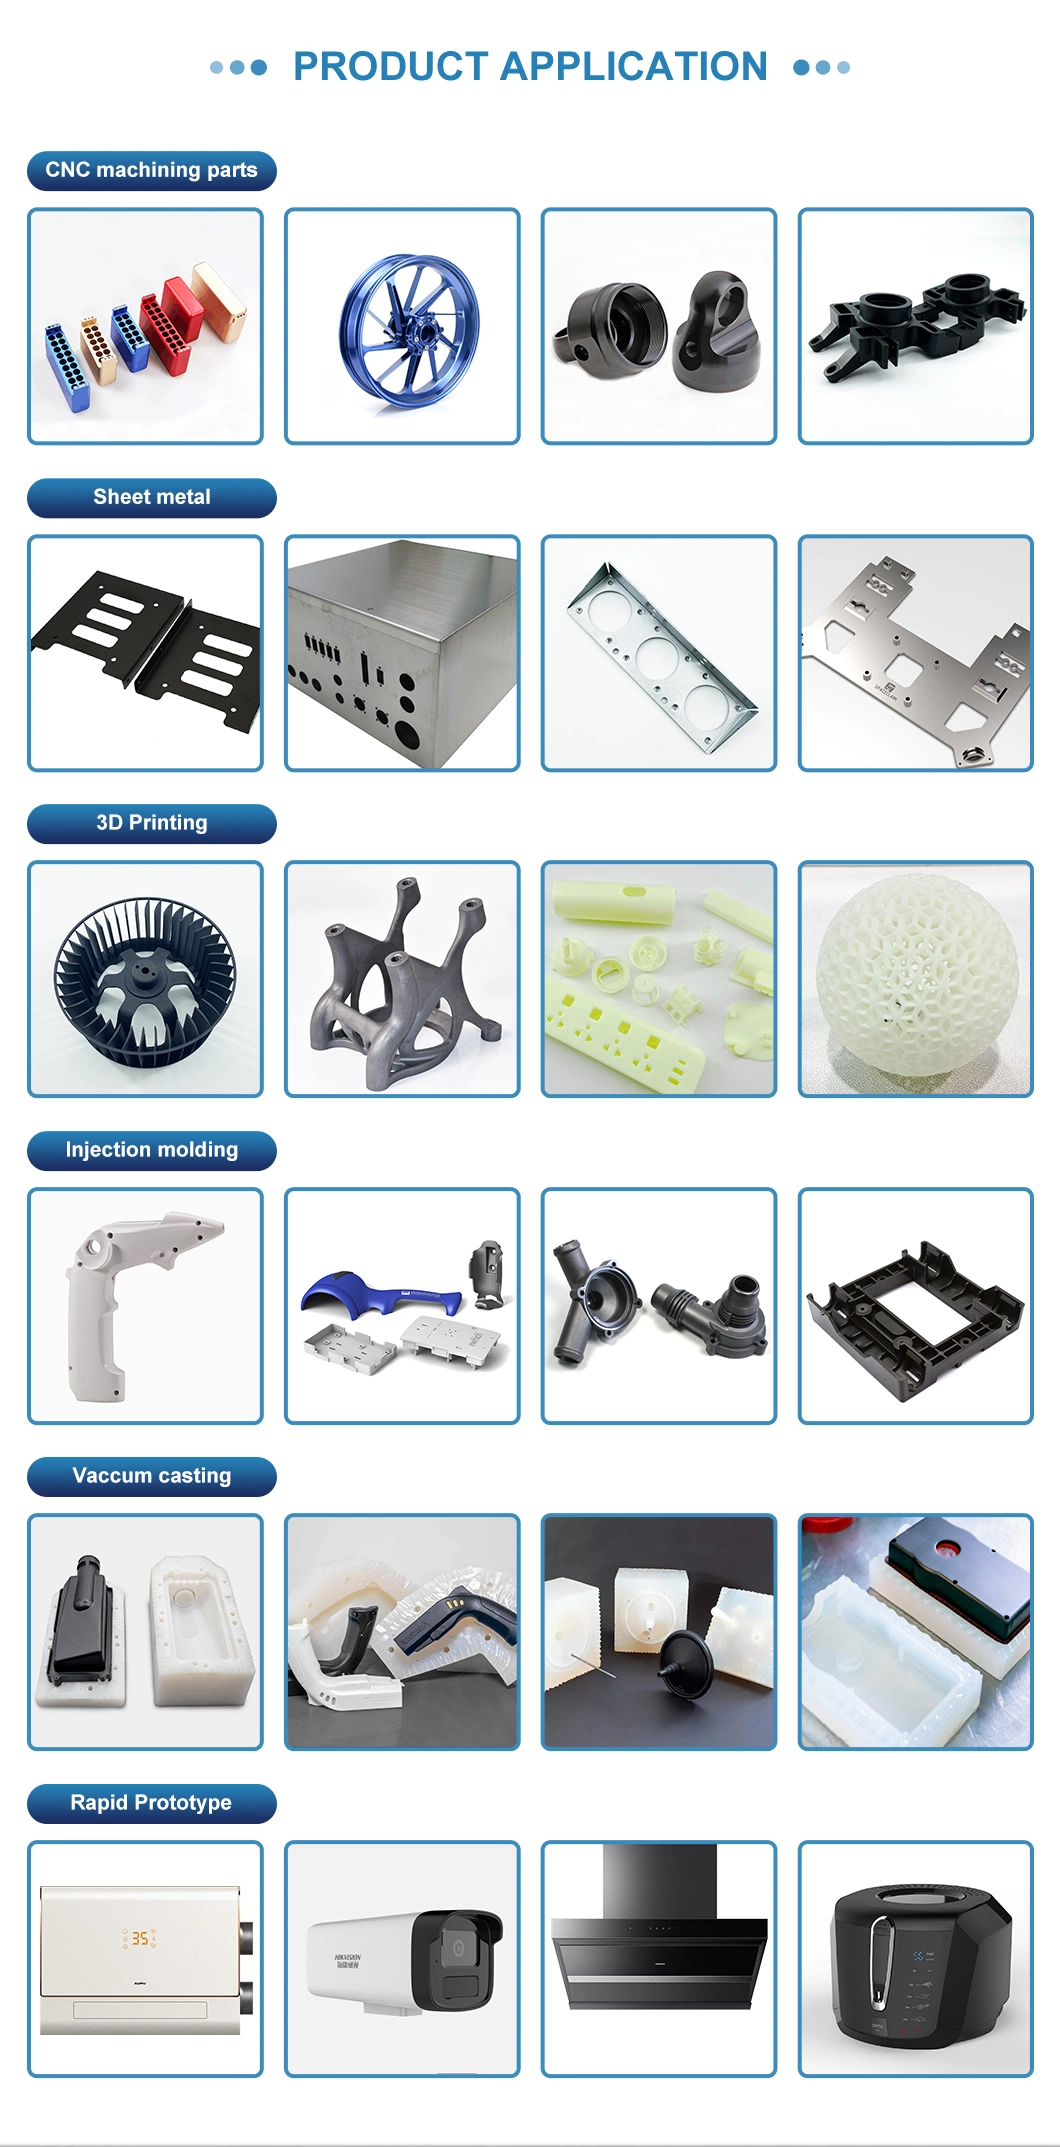 High Quality Mass Production and Affordable Rapid Prototyping SLA/SLS Laser Resin Printing Plastic 3D Printing Service